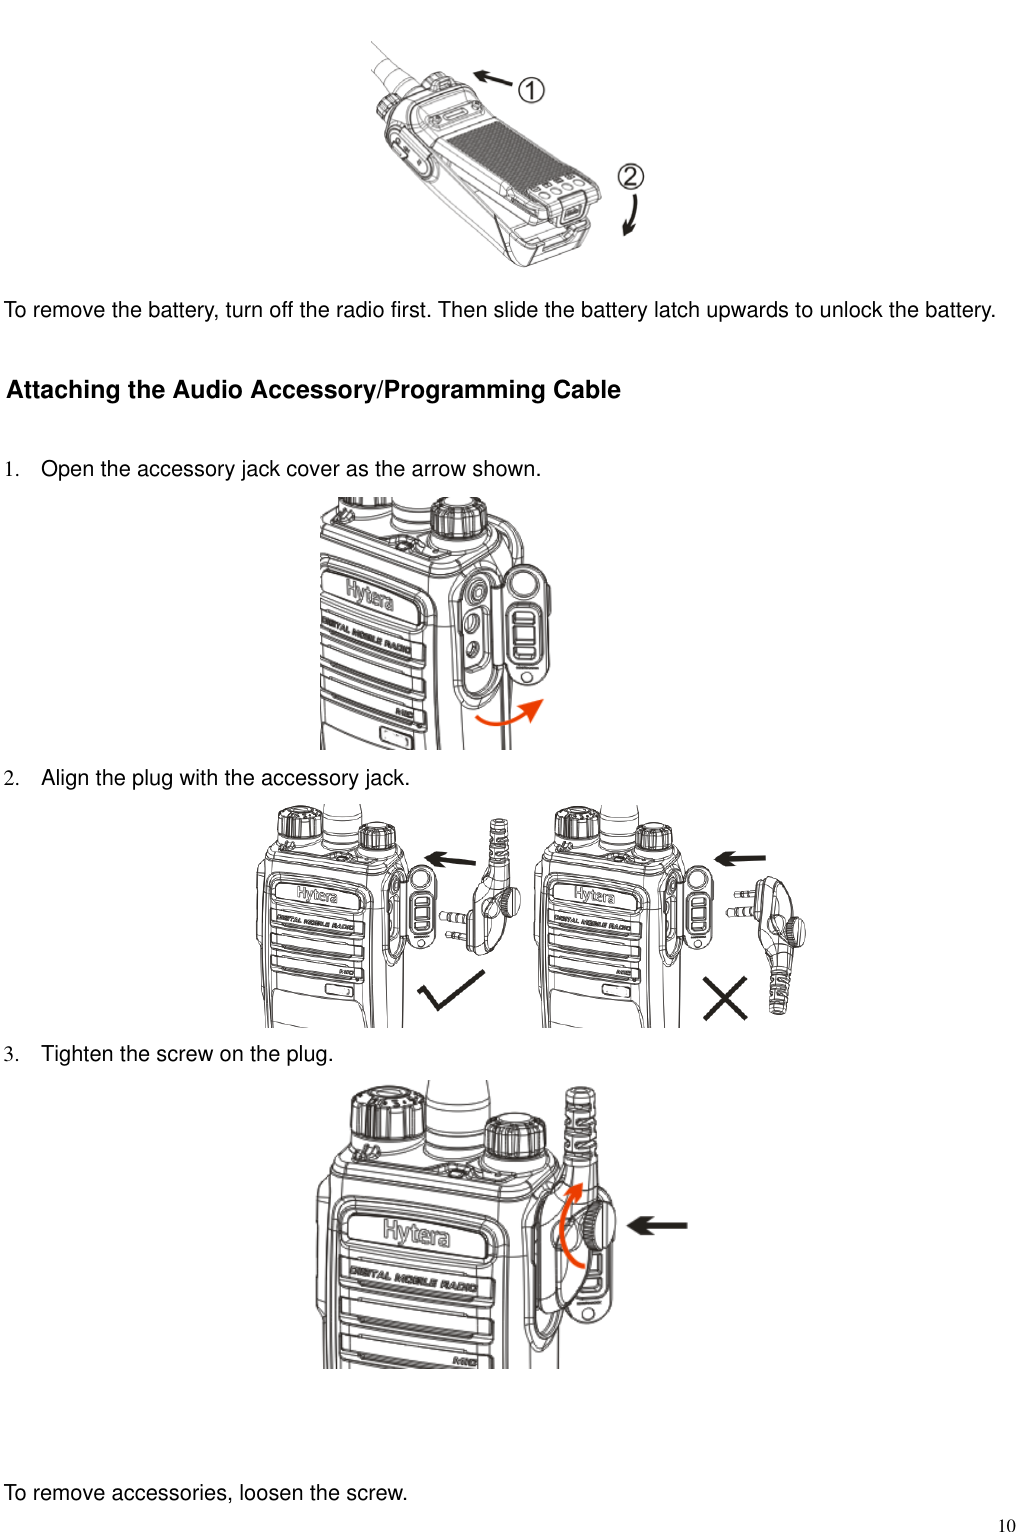                                                                                                              10 To remove the battery, turn off the radio first. Then slide the battery latch upwards to unlock the battery.   Attaching the Audio Accessory/Programming Cable 1.  Open the accessory jack cover as the arrow shown.  2.  Align the plug with the accessory jack.    3.  Tighten the screw on the plug.       To remove accessories, loosen the screw.   